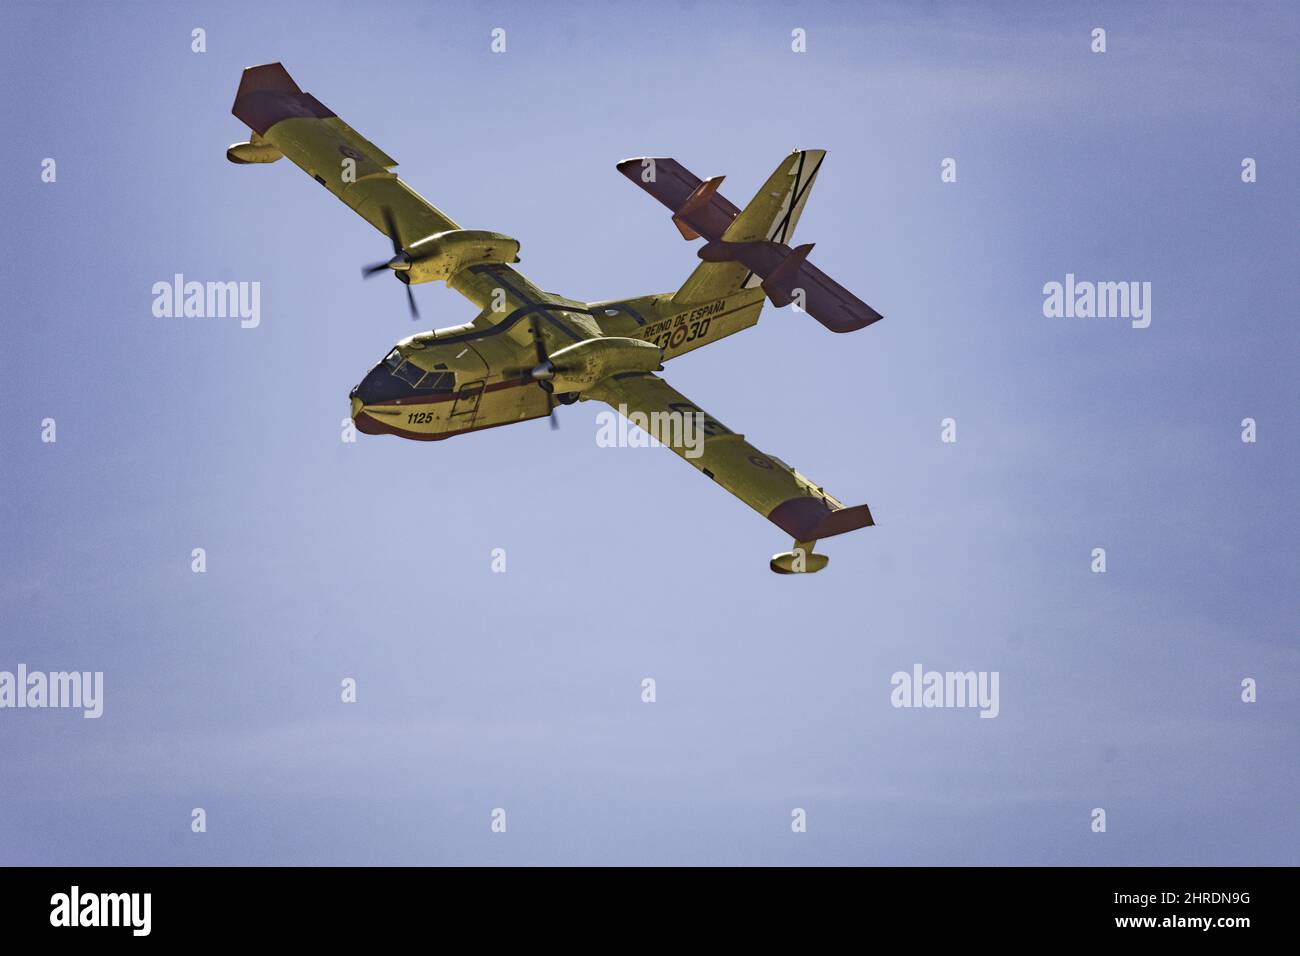 Old yellow amphibian air plane - Canadair CL-215T Stock Photo